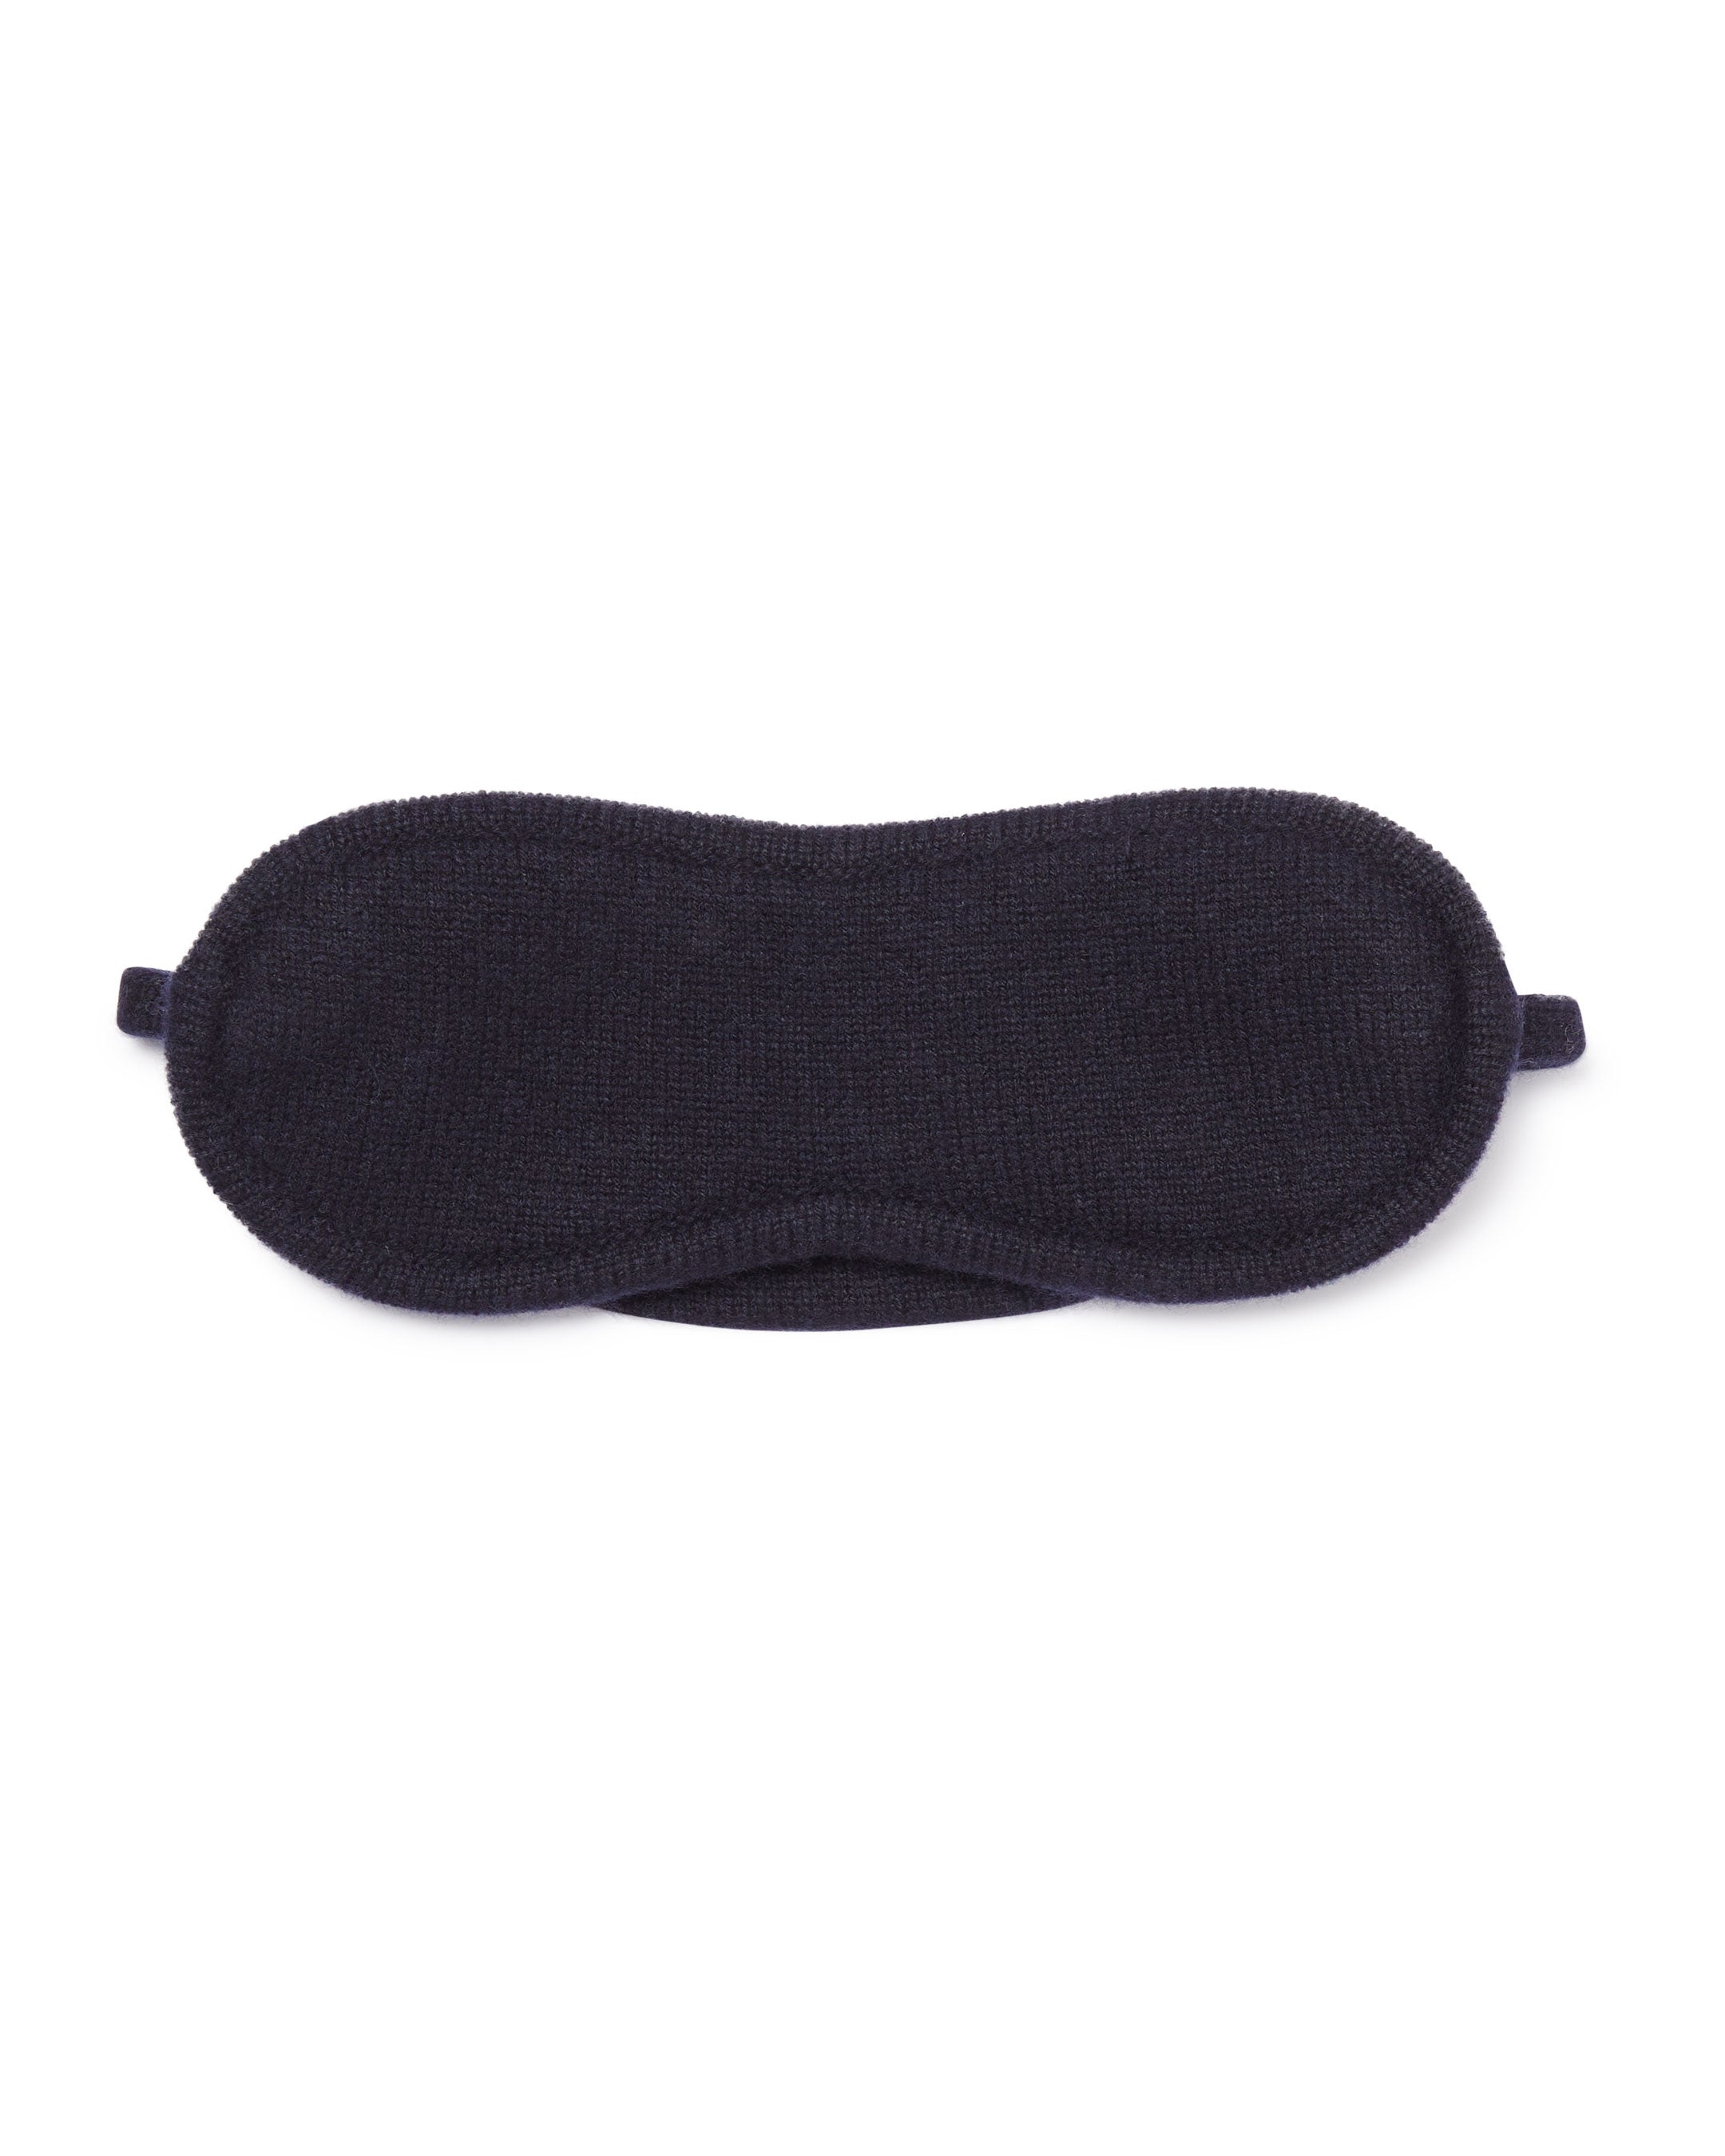 Unisex Knitted Cashmere Eye Mask Navy Blue | N.Peal